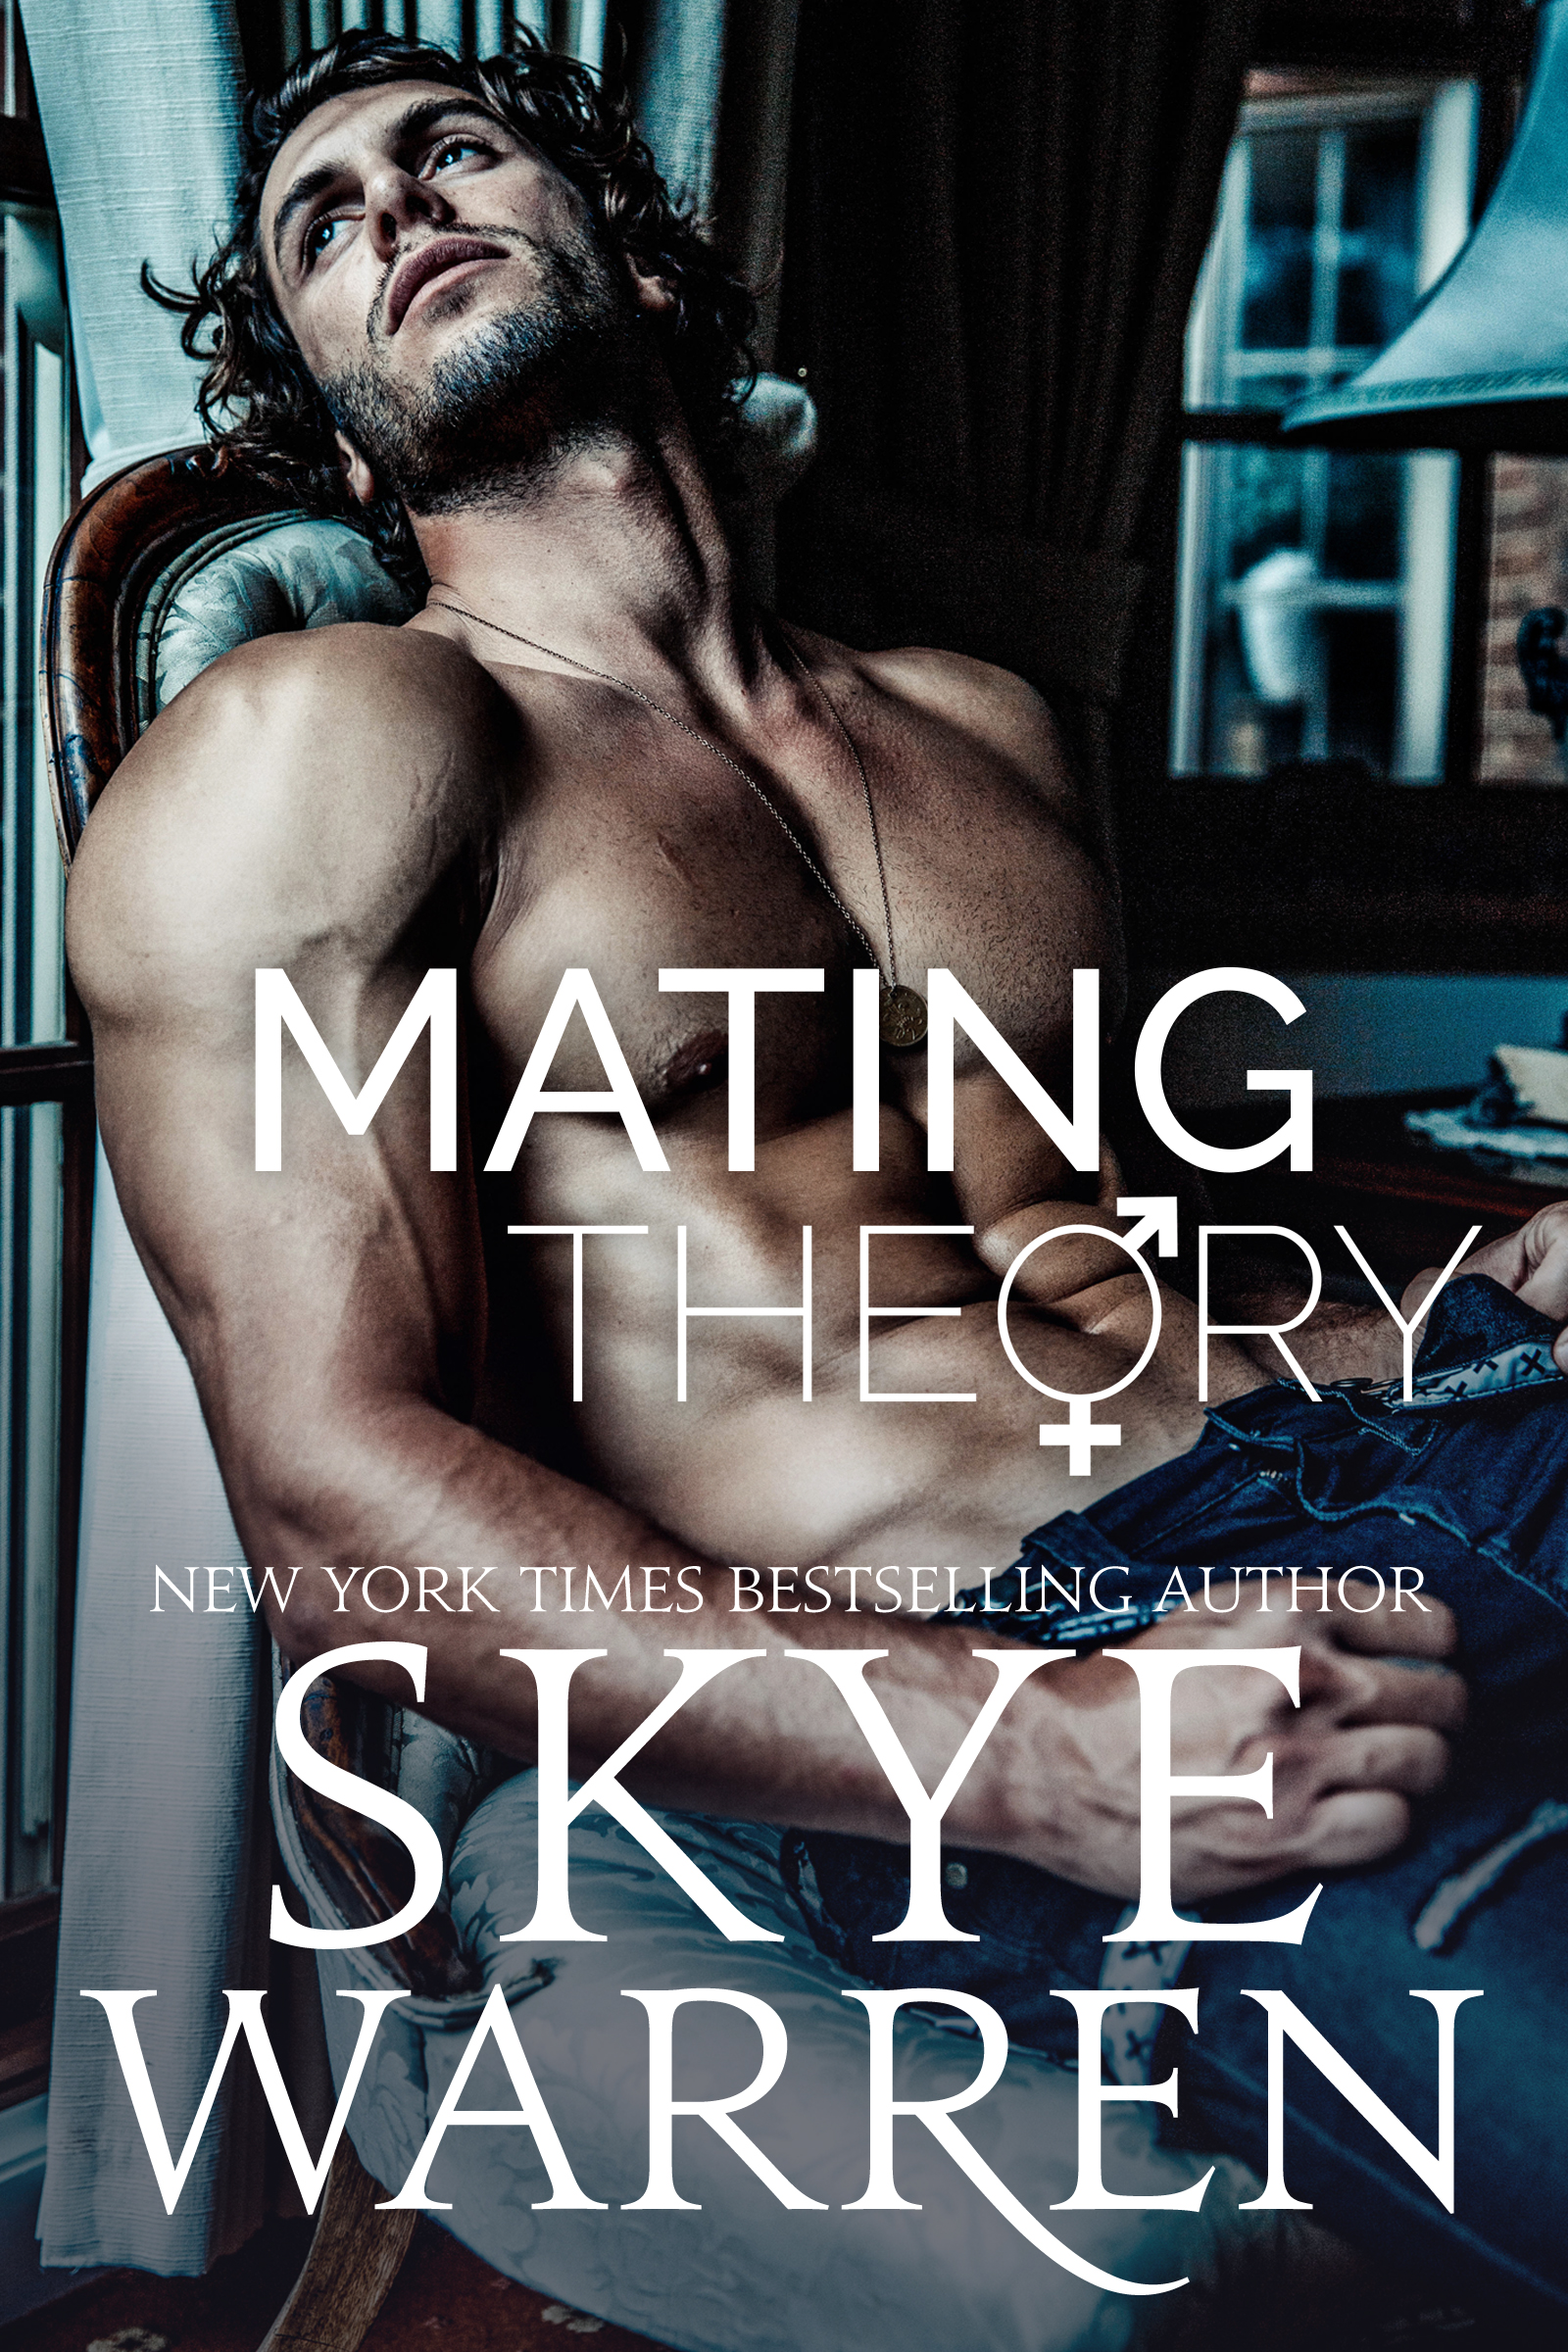 Copy of MatingTheory-COVER.jpg